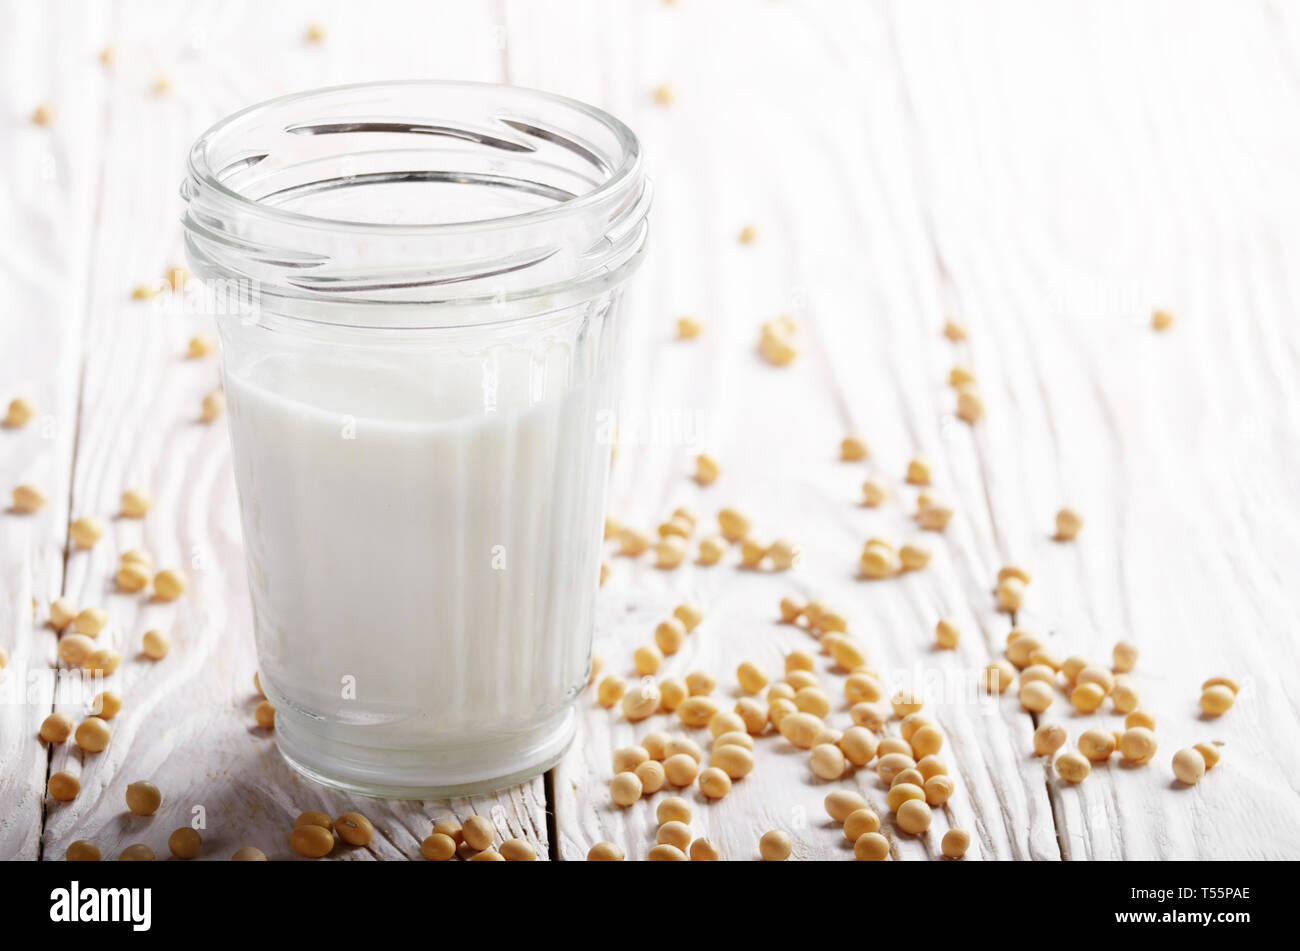 Non-dairy alternative Soy milk or yogurt in mason jar on white wooden table with soybeans aside Stock Photo